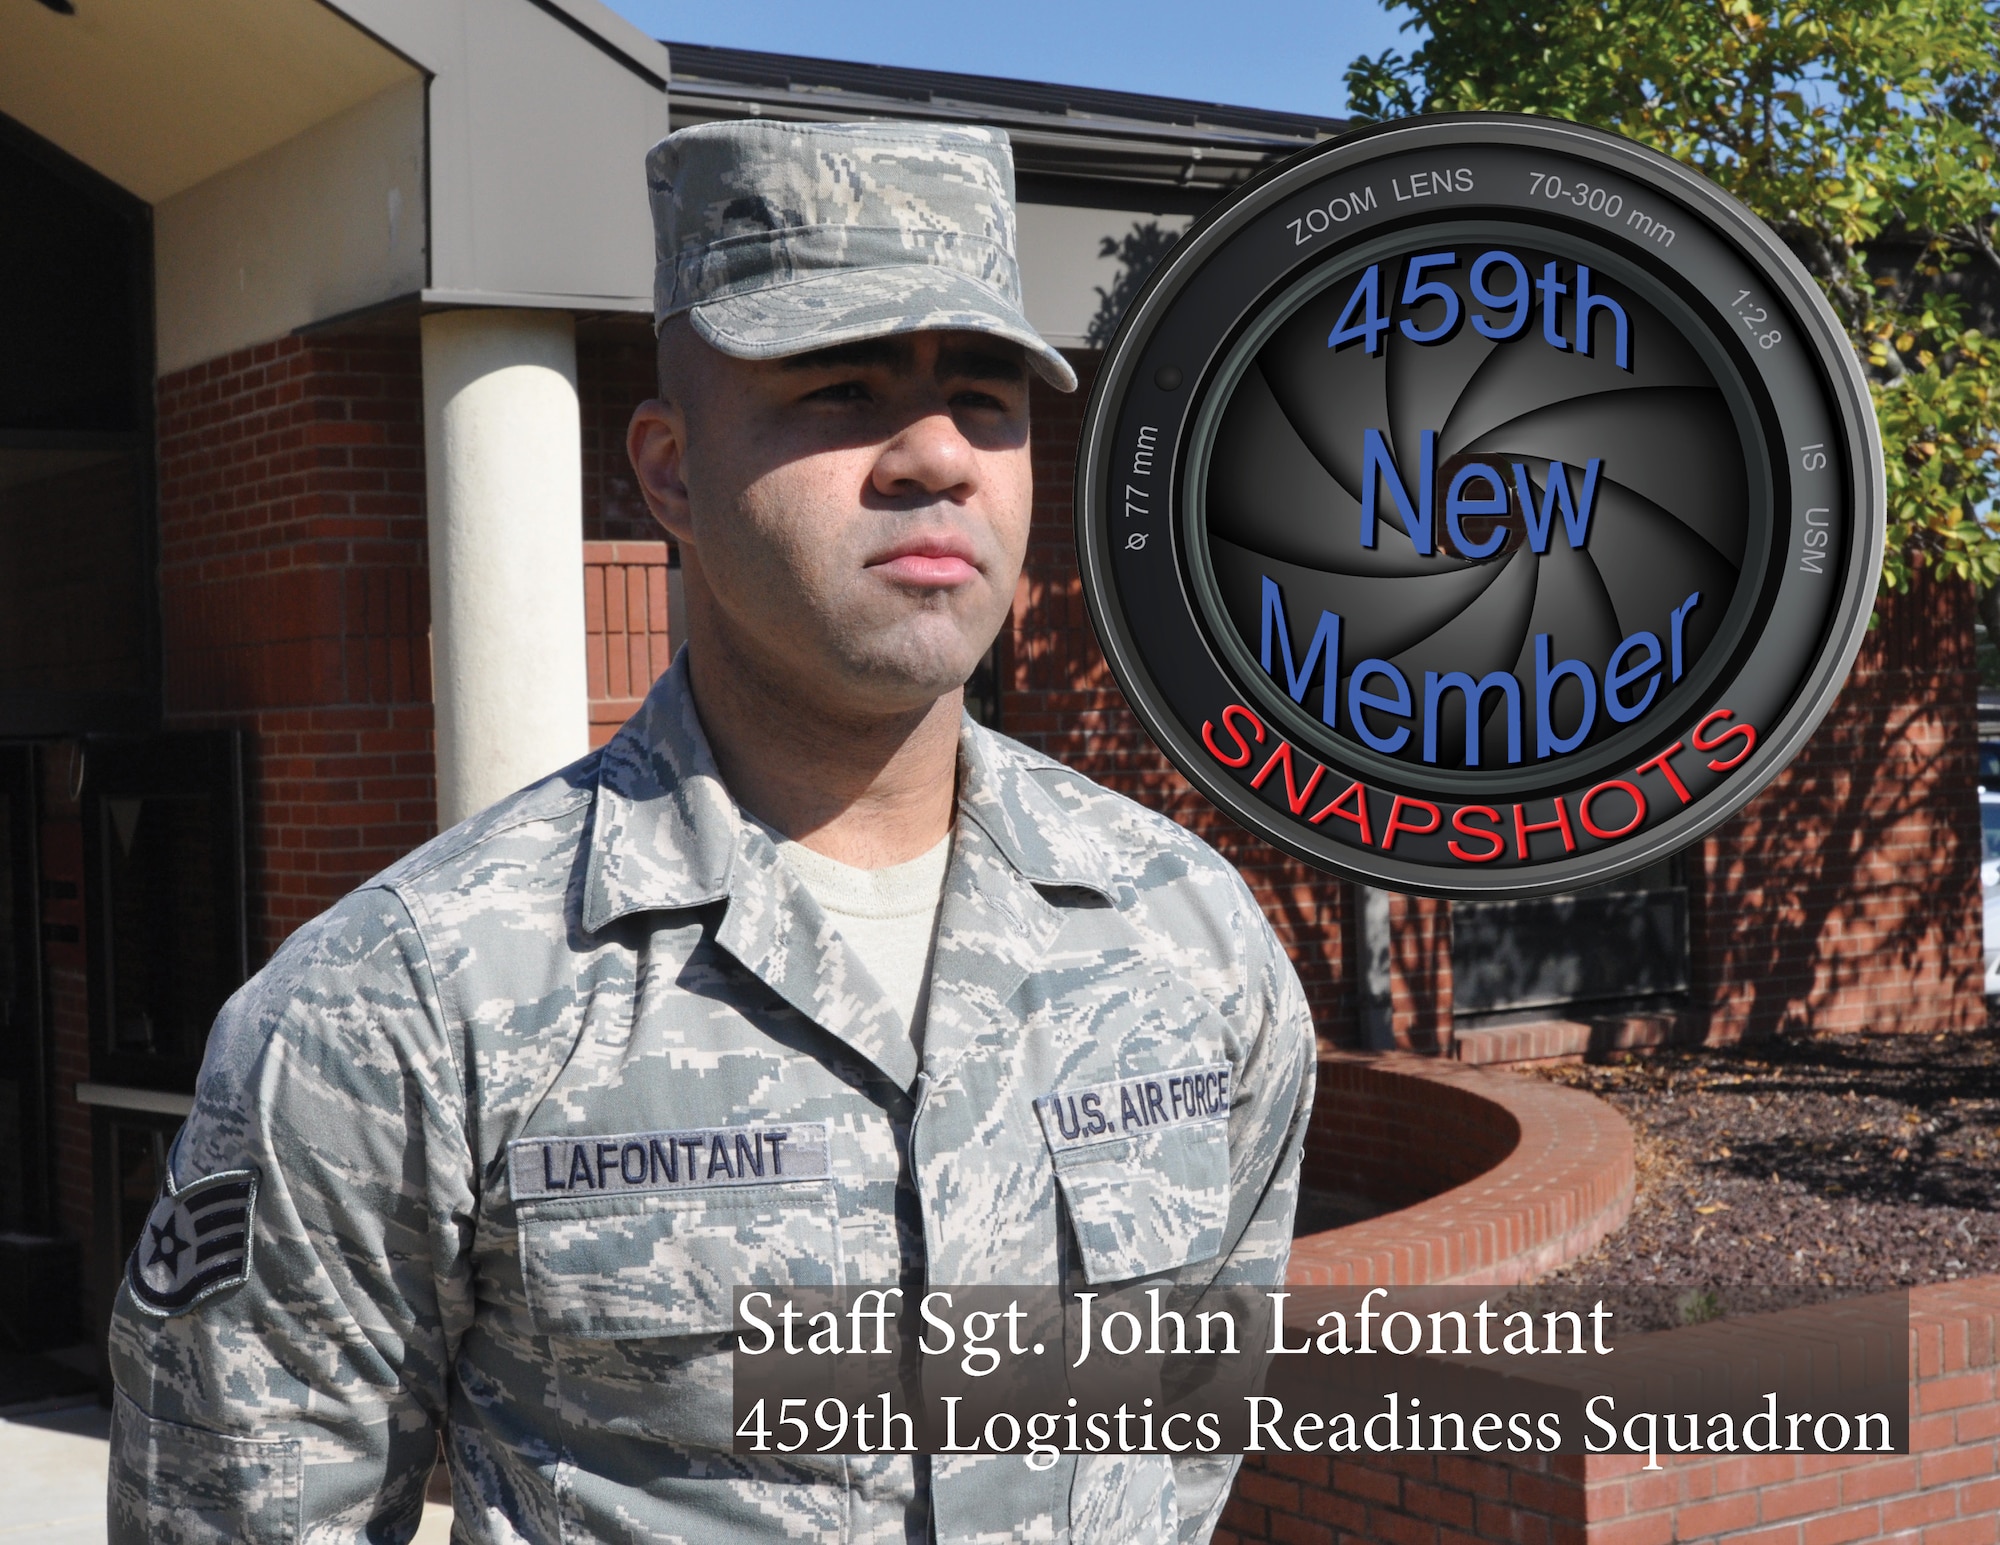 Staff Sergeant John Lafontant poses for a photo in front of the 459th Security Forces Squadron building, October 25, 2014 at Joint Base Andrews, Md. Lafontant is the 459th Air Refueling Wing’s new snapshot member of the month for October. (U.S. Air Force photo by Tech. Sgt. Brent Skeen)